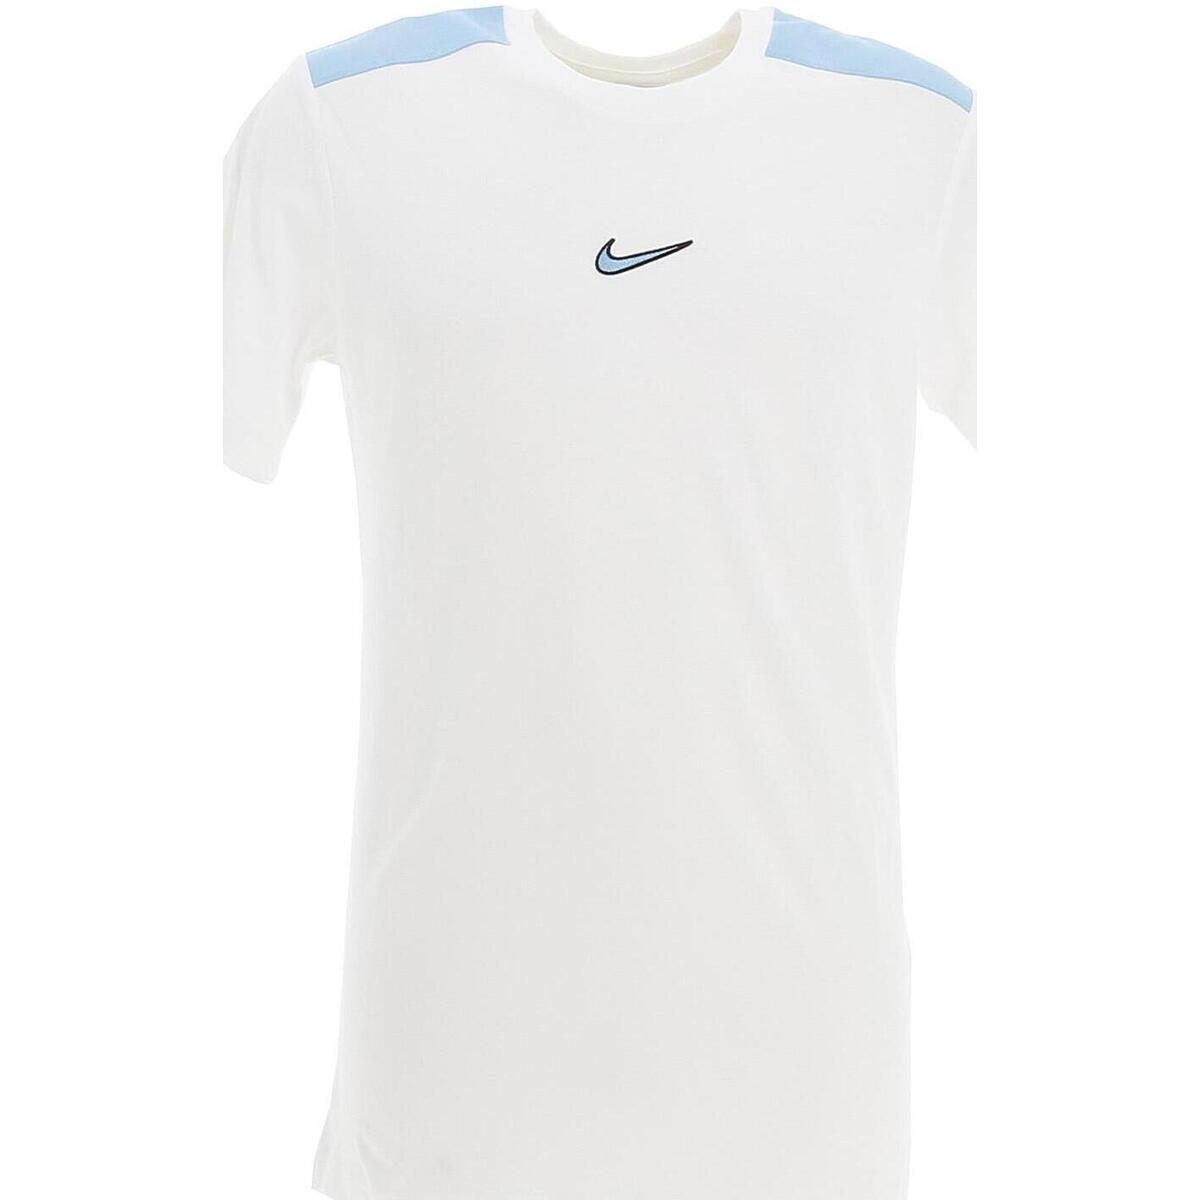 Nike M nsw sp graphic tee 27643525 1200 A